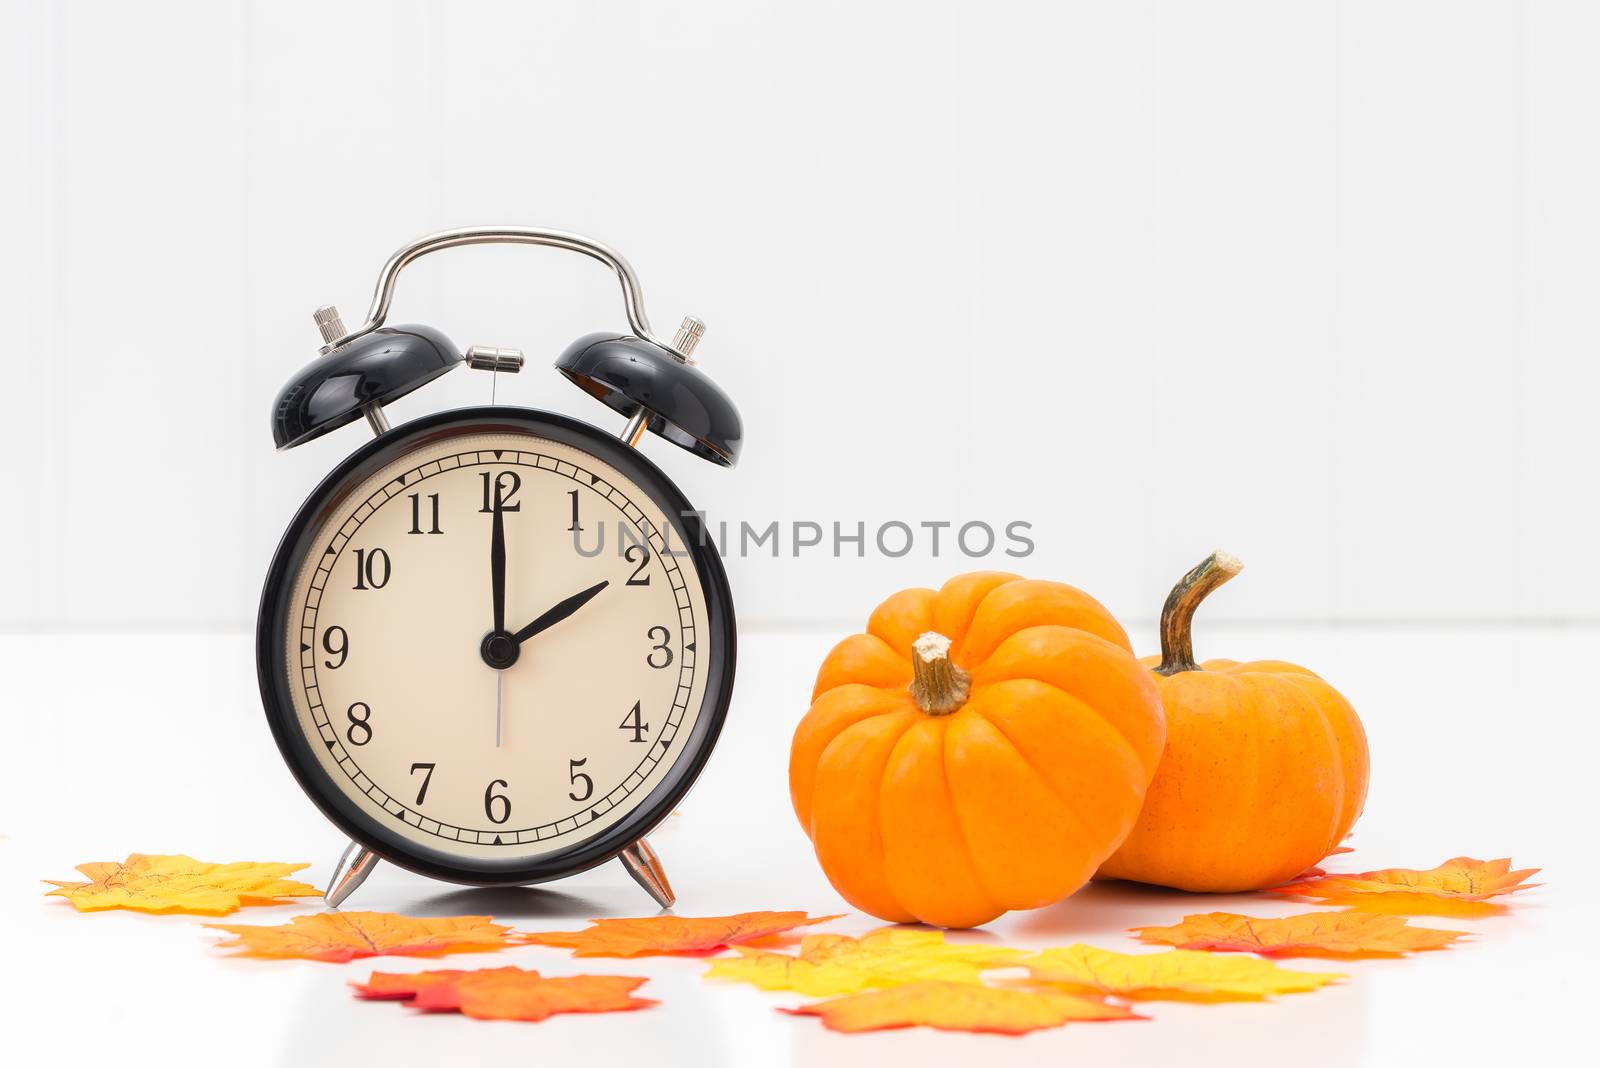 Clock in Autumn Theme by billberryphotography